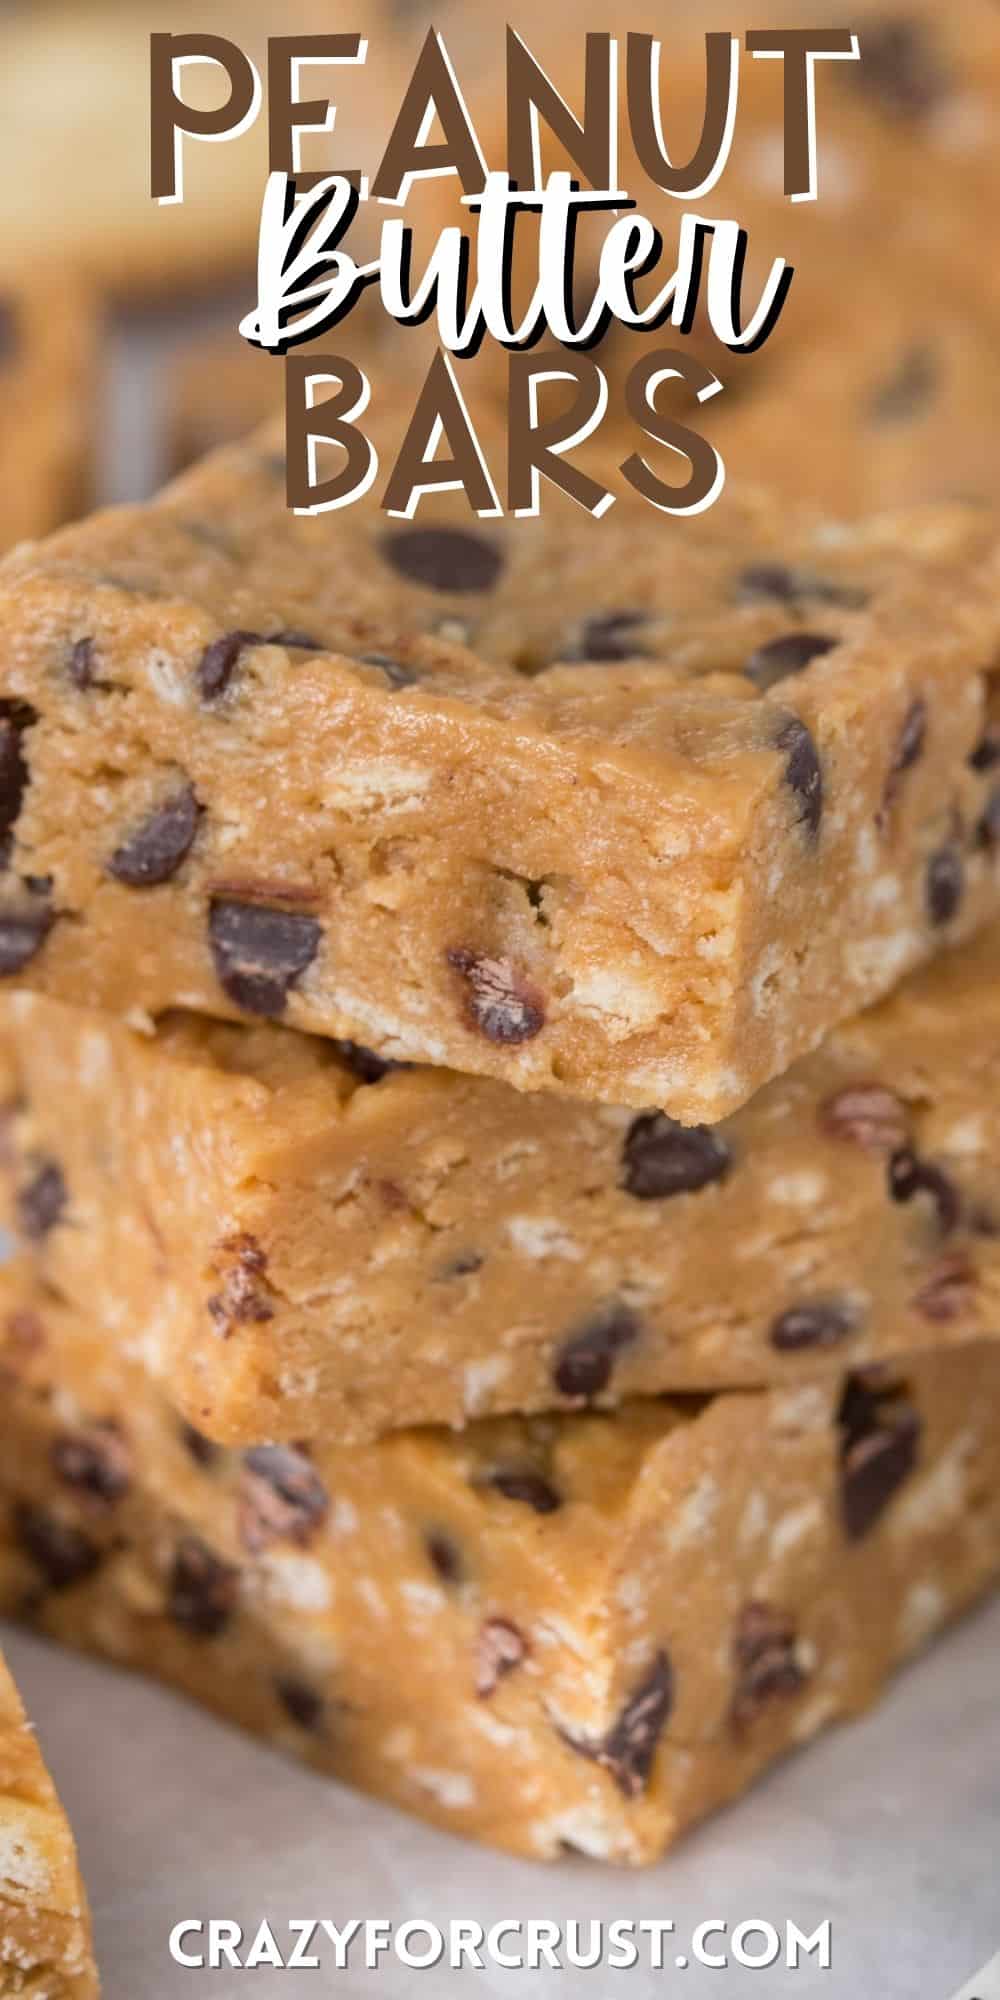 stacked peanut butter bars with chocolate chips baked in with words on the image.